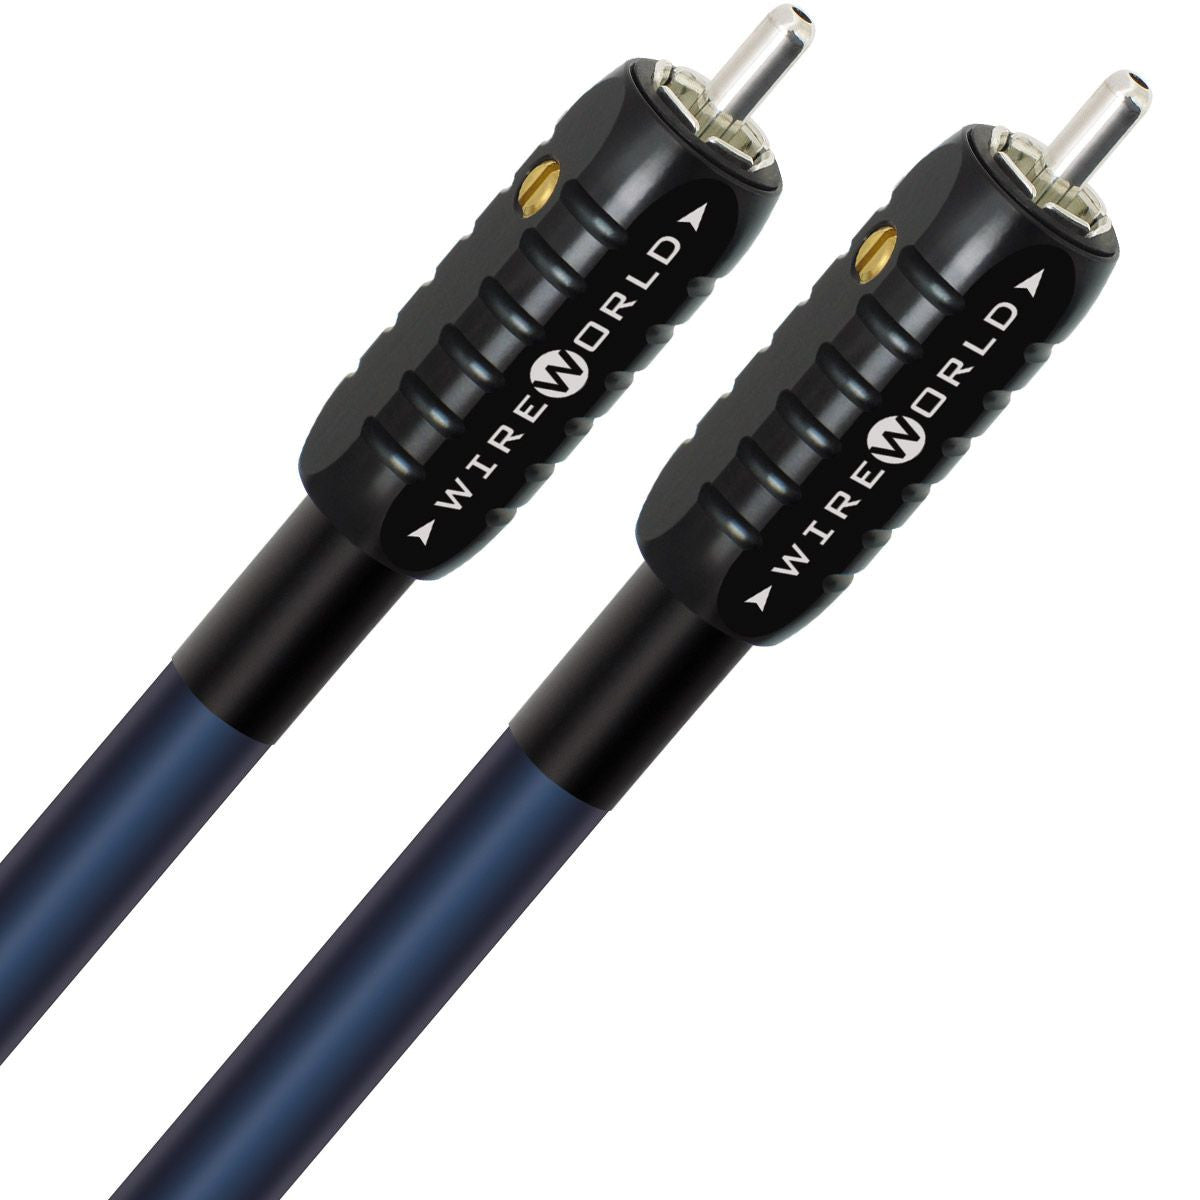 Wireworld Oasis 7 Audio Interconnect Cable